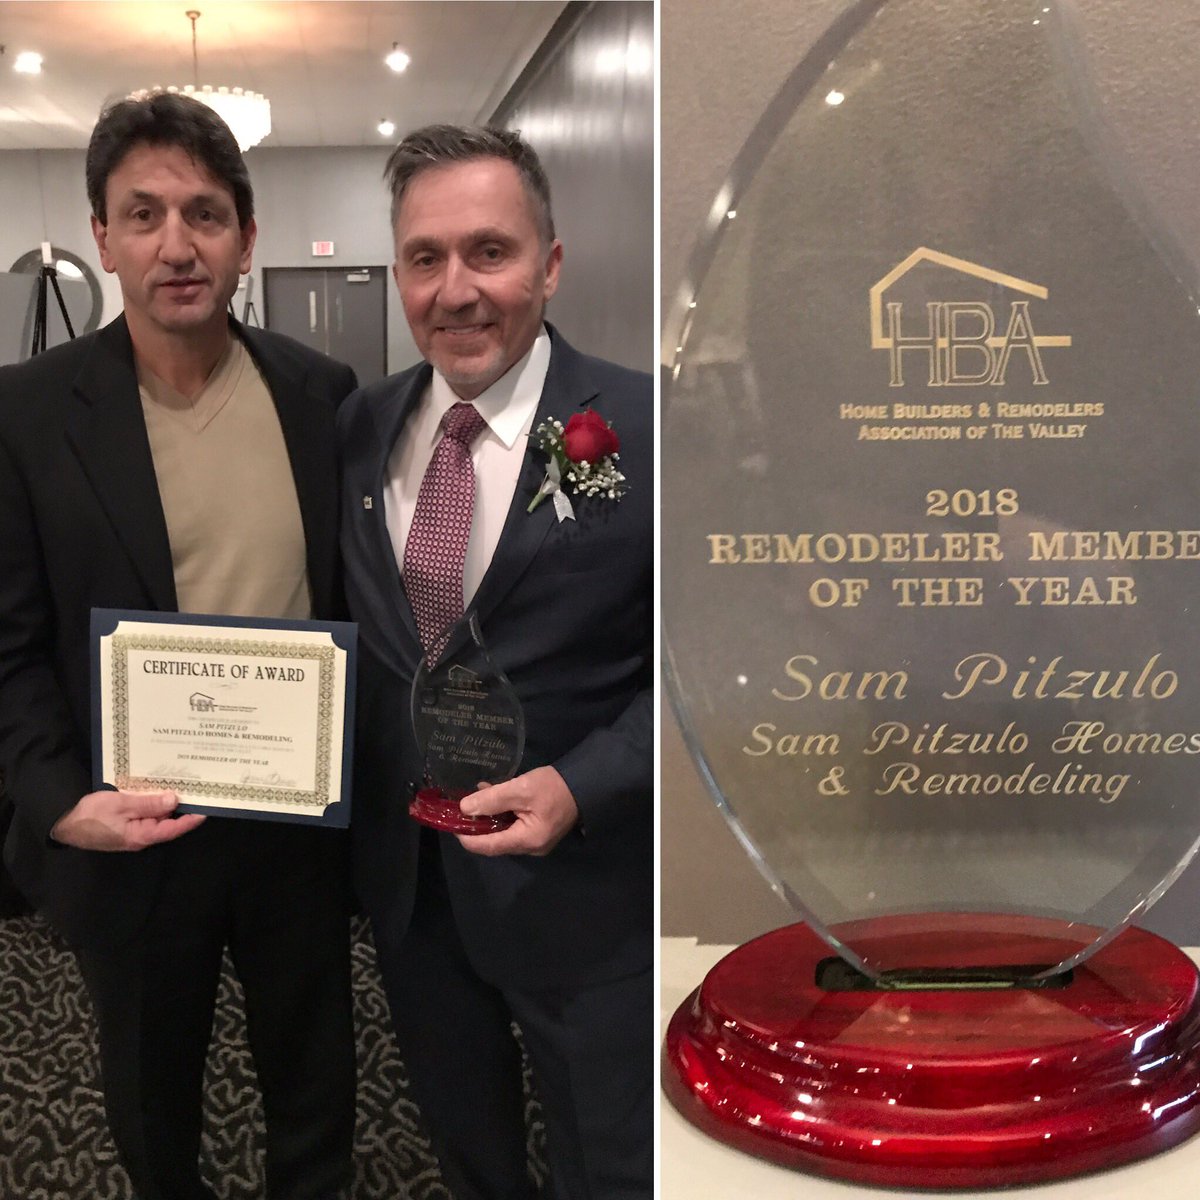 The HBA would like to congratulate SAM PITZULO for bring awarded the 2018 HBA REMODELER OF THE YEAR at the HBA Presidents Dinner! Congrats to Sam & his staff! @SamPitzuloHomes